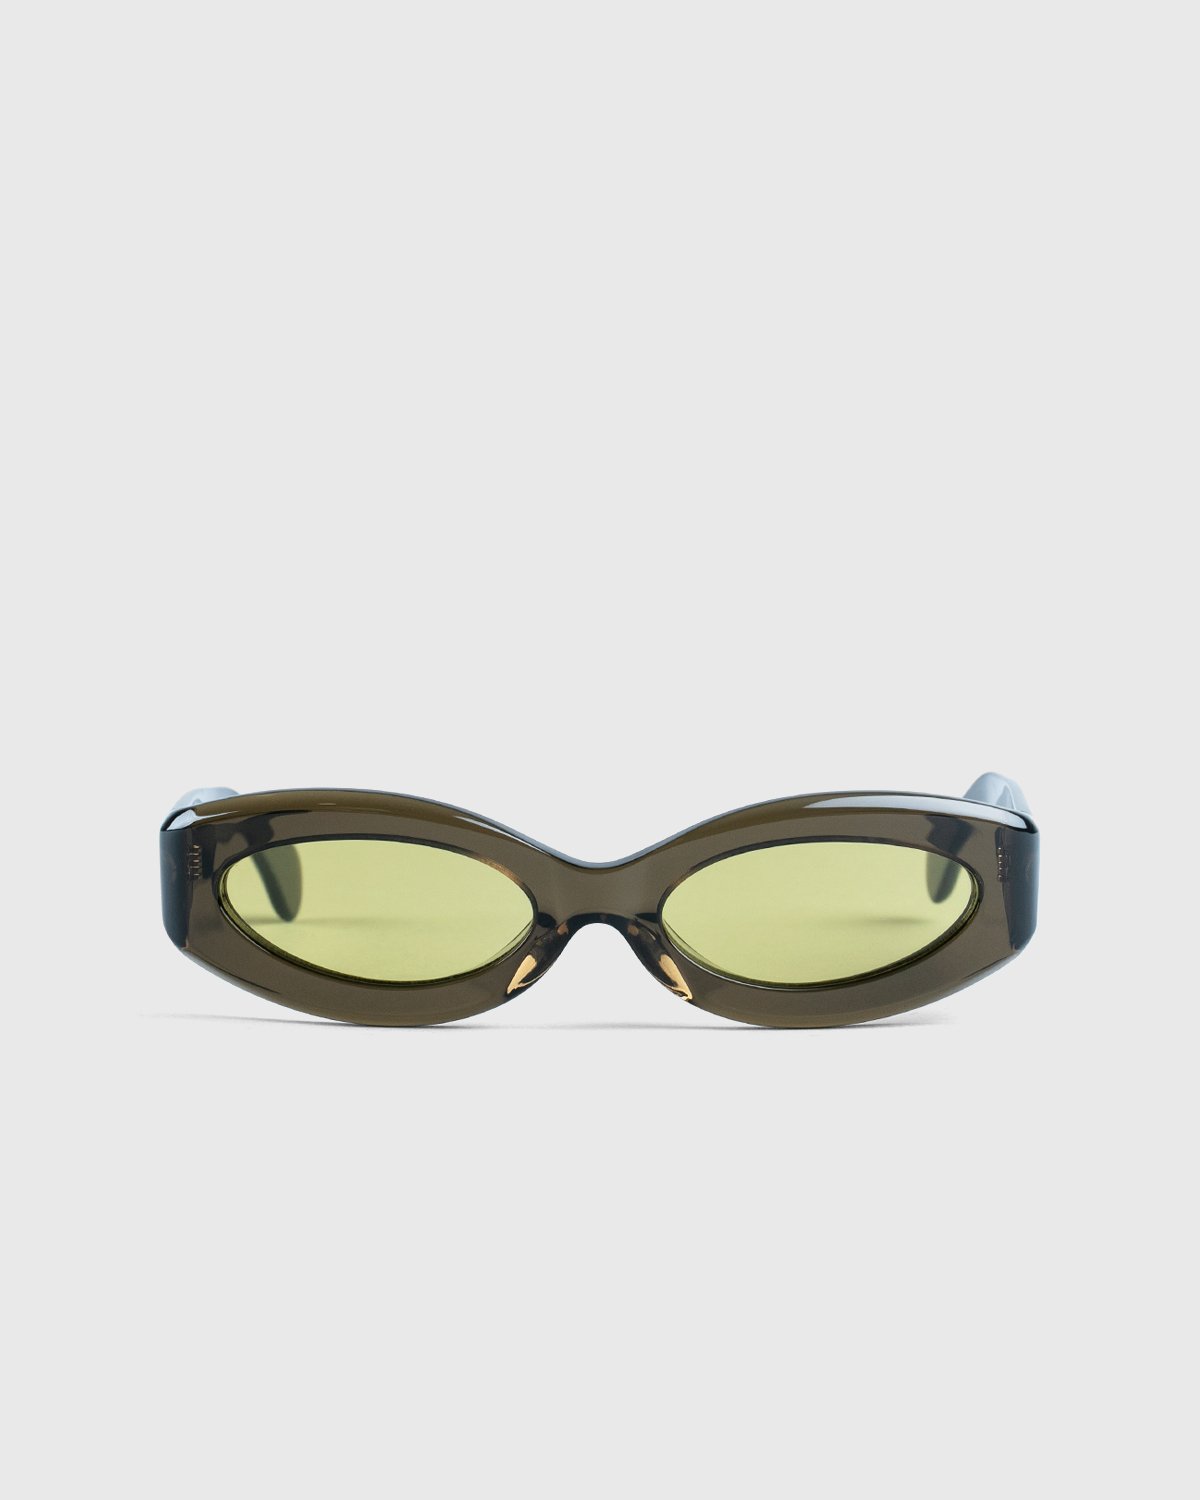 Port Tanger - Crepusculo Cardamom Warm Olive Lens - Accessories - Green - Image 1